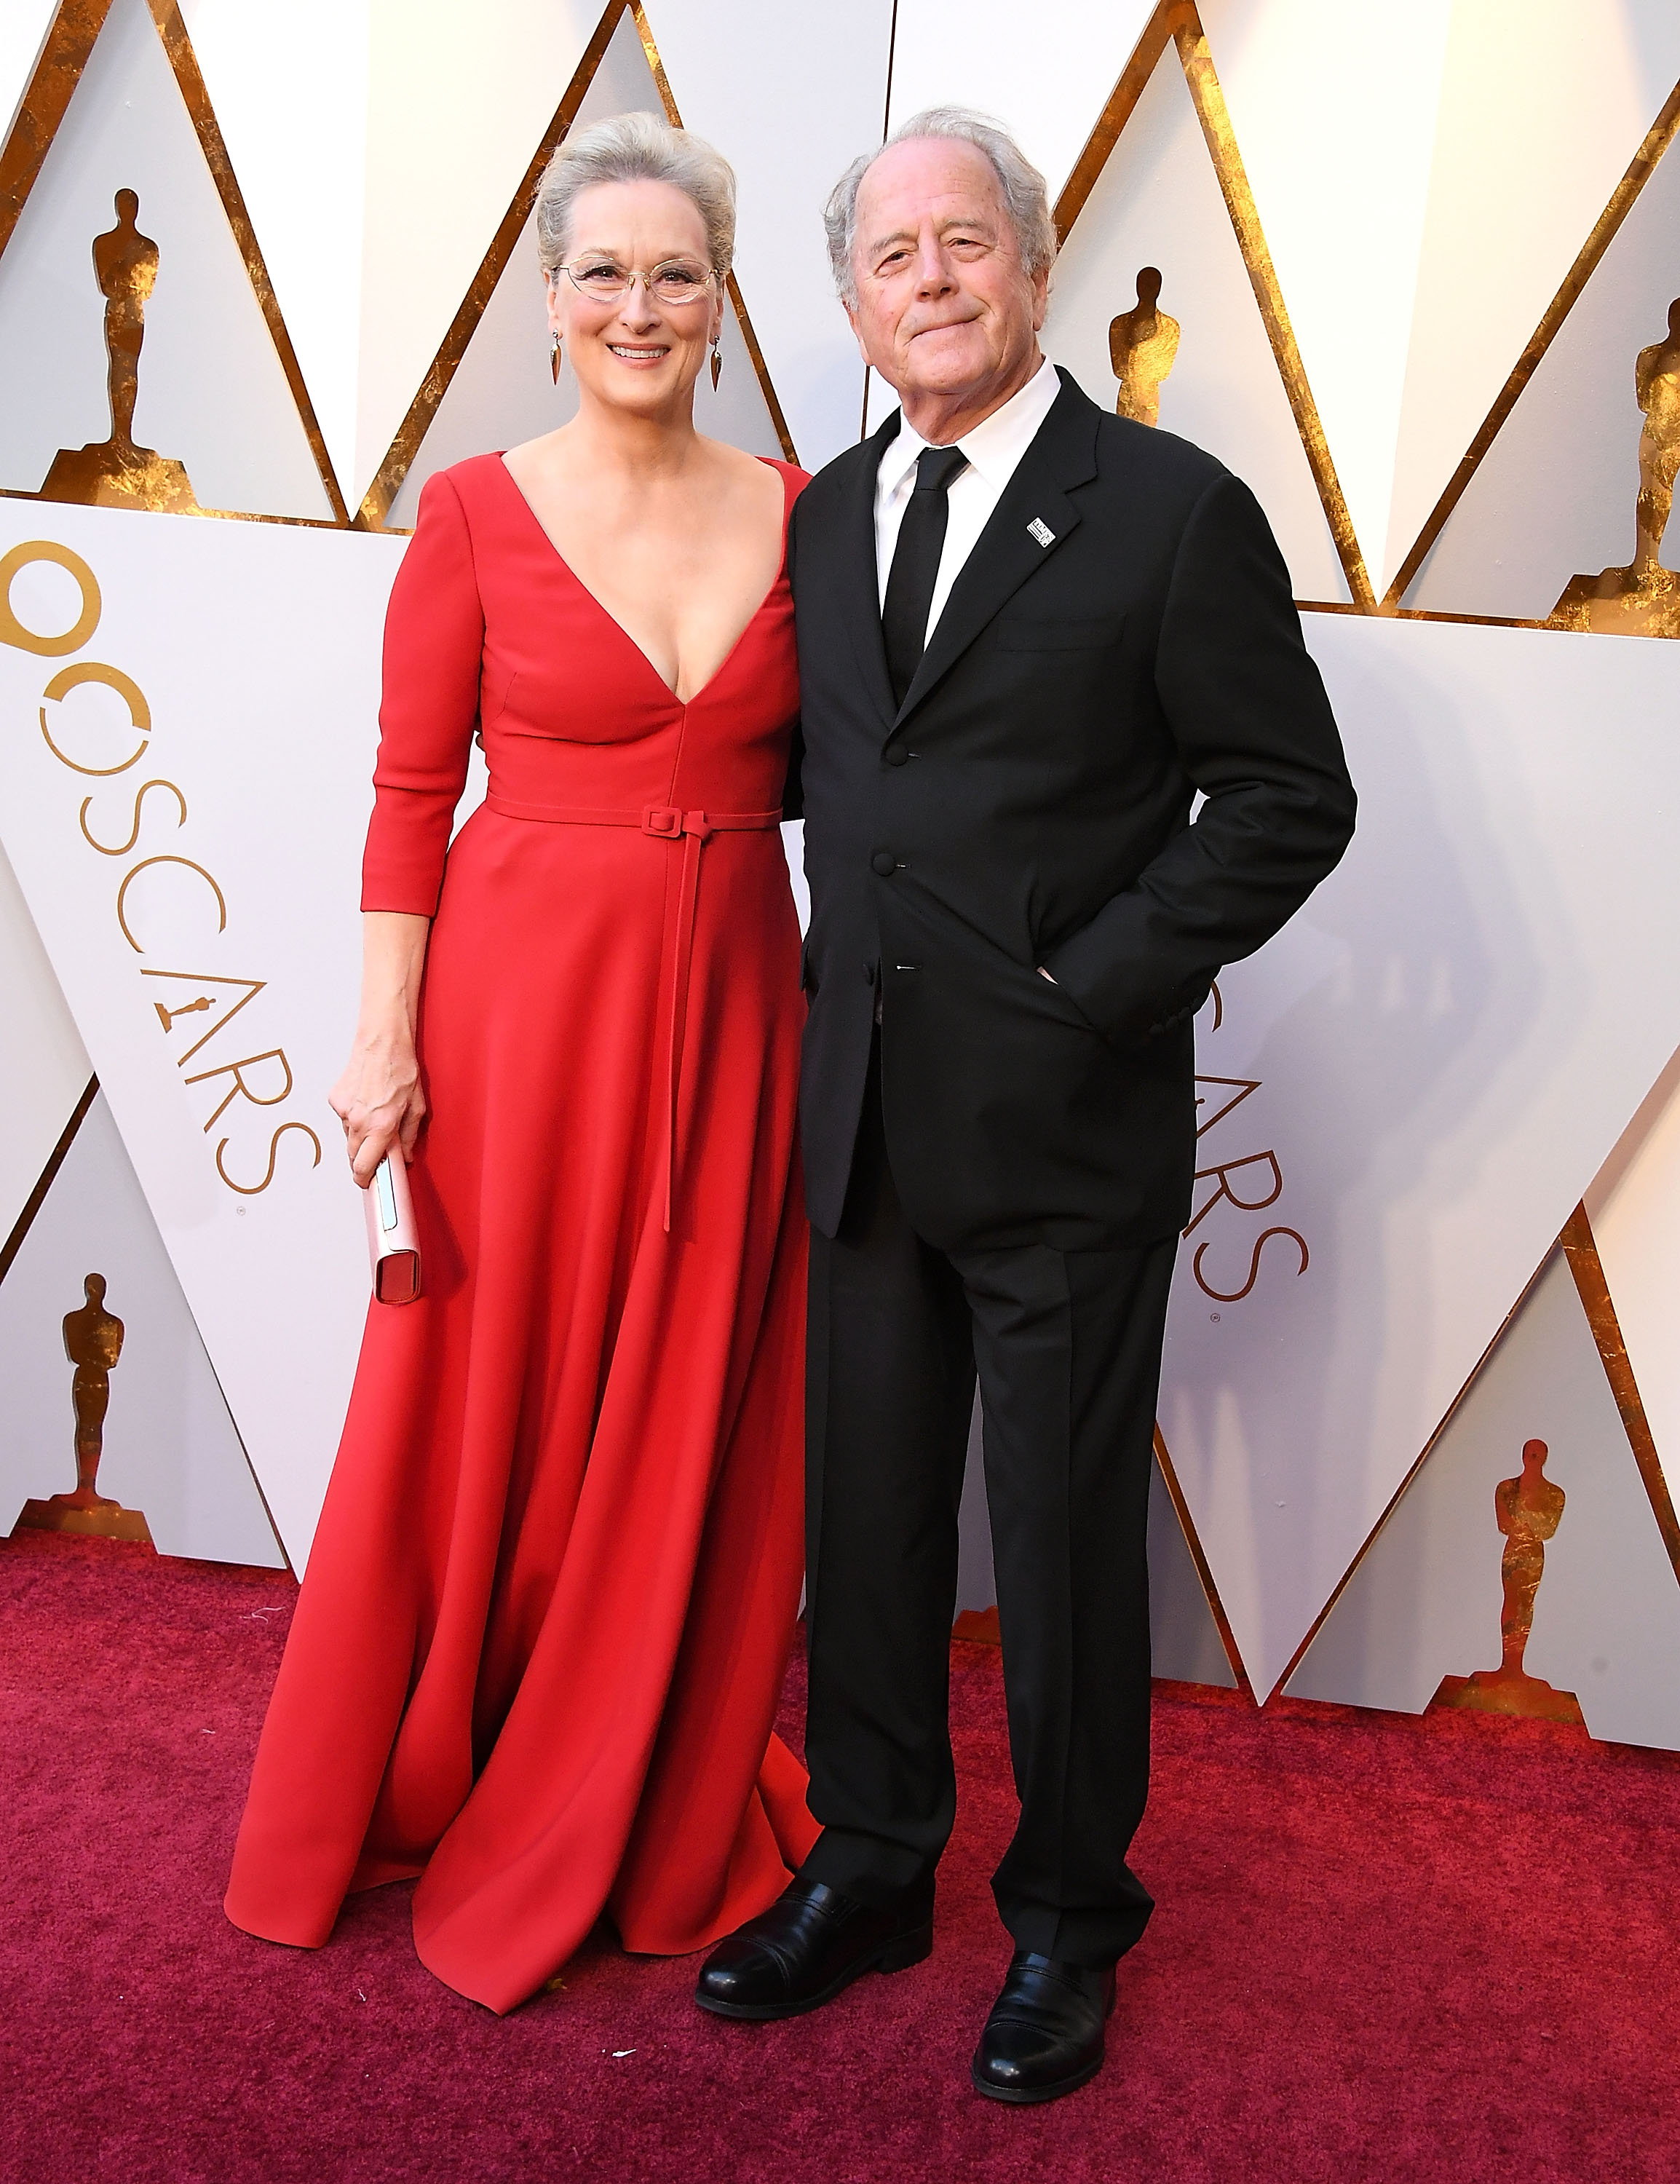 Meryl Streep and Don Gummer at the 90th Annual Academy Awards at Hollywood & Highland Center on March 4, 2018 in Hollywood, California. | Source: Getty Images